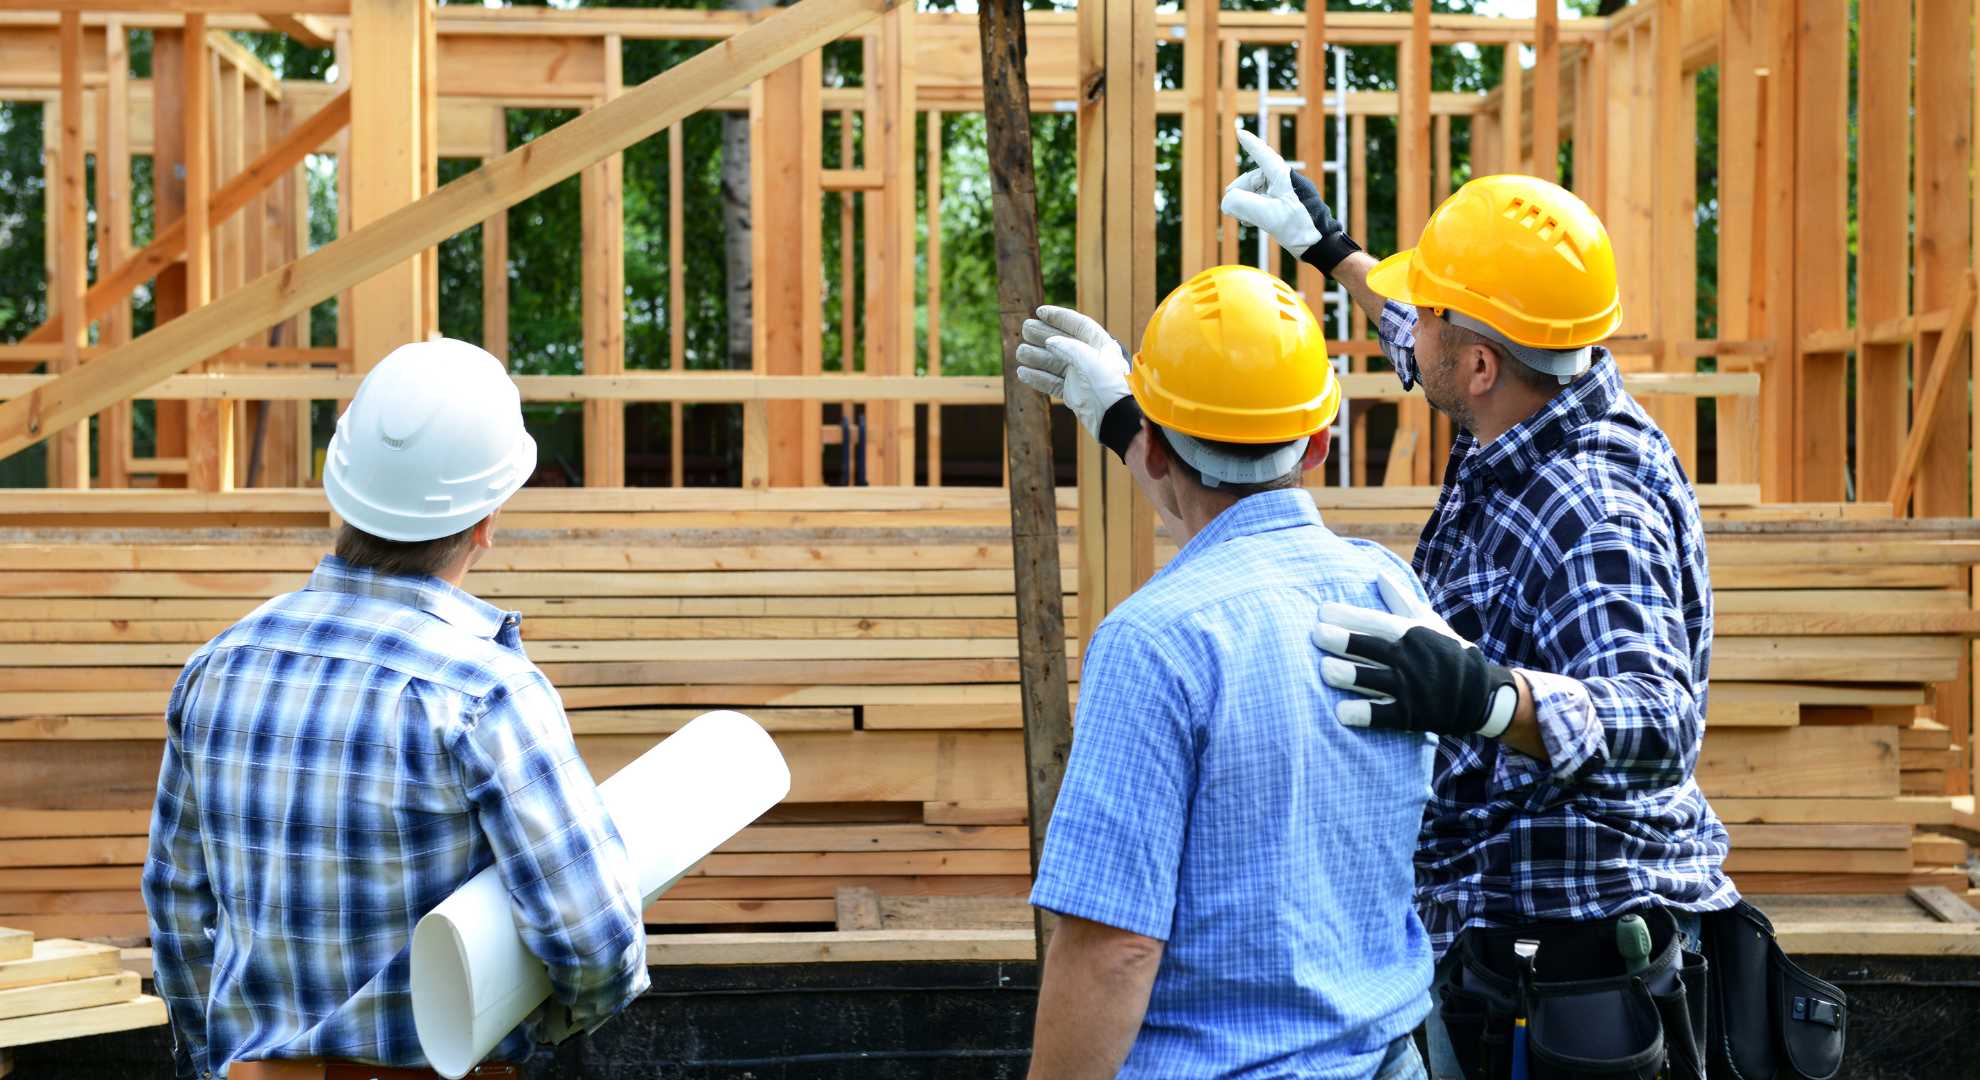 Image of men at construction site